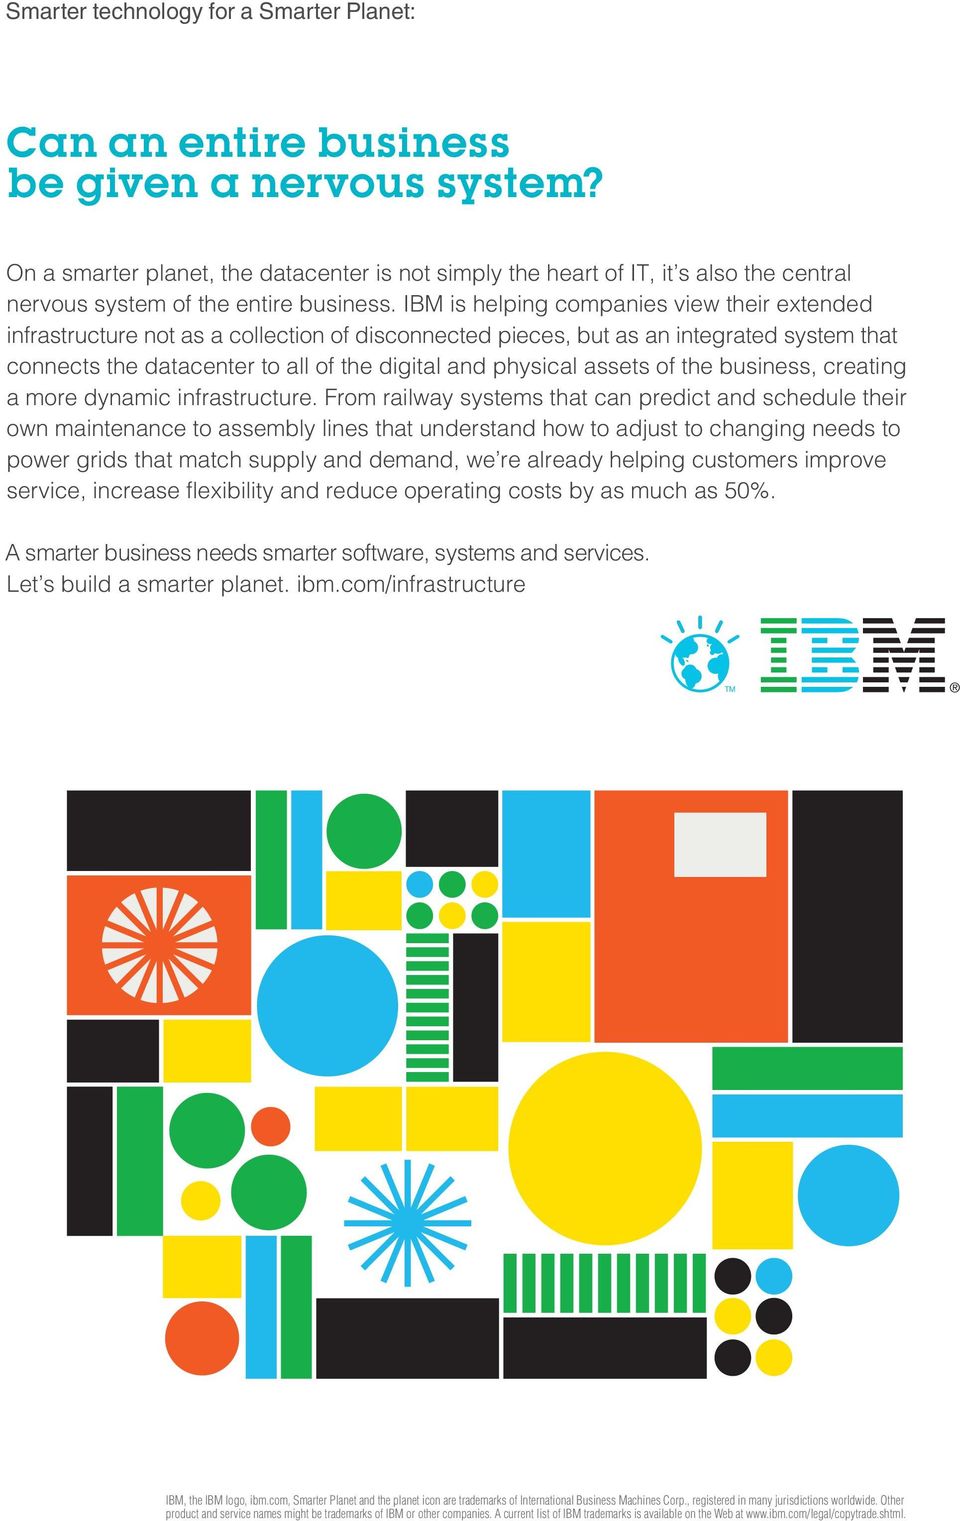 IBM is helping companies view their extended infrastructure not as a collection of disconnected pieces, but as an integrated system that connects the datacenter to all of the digital and physical